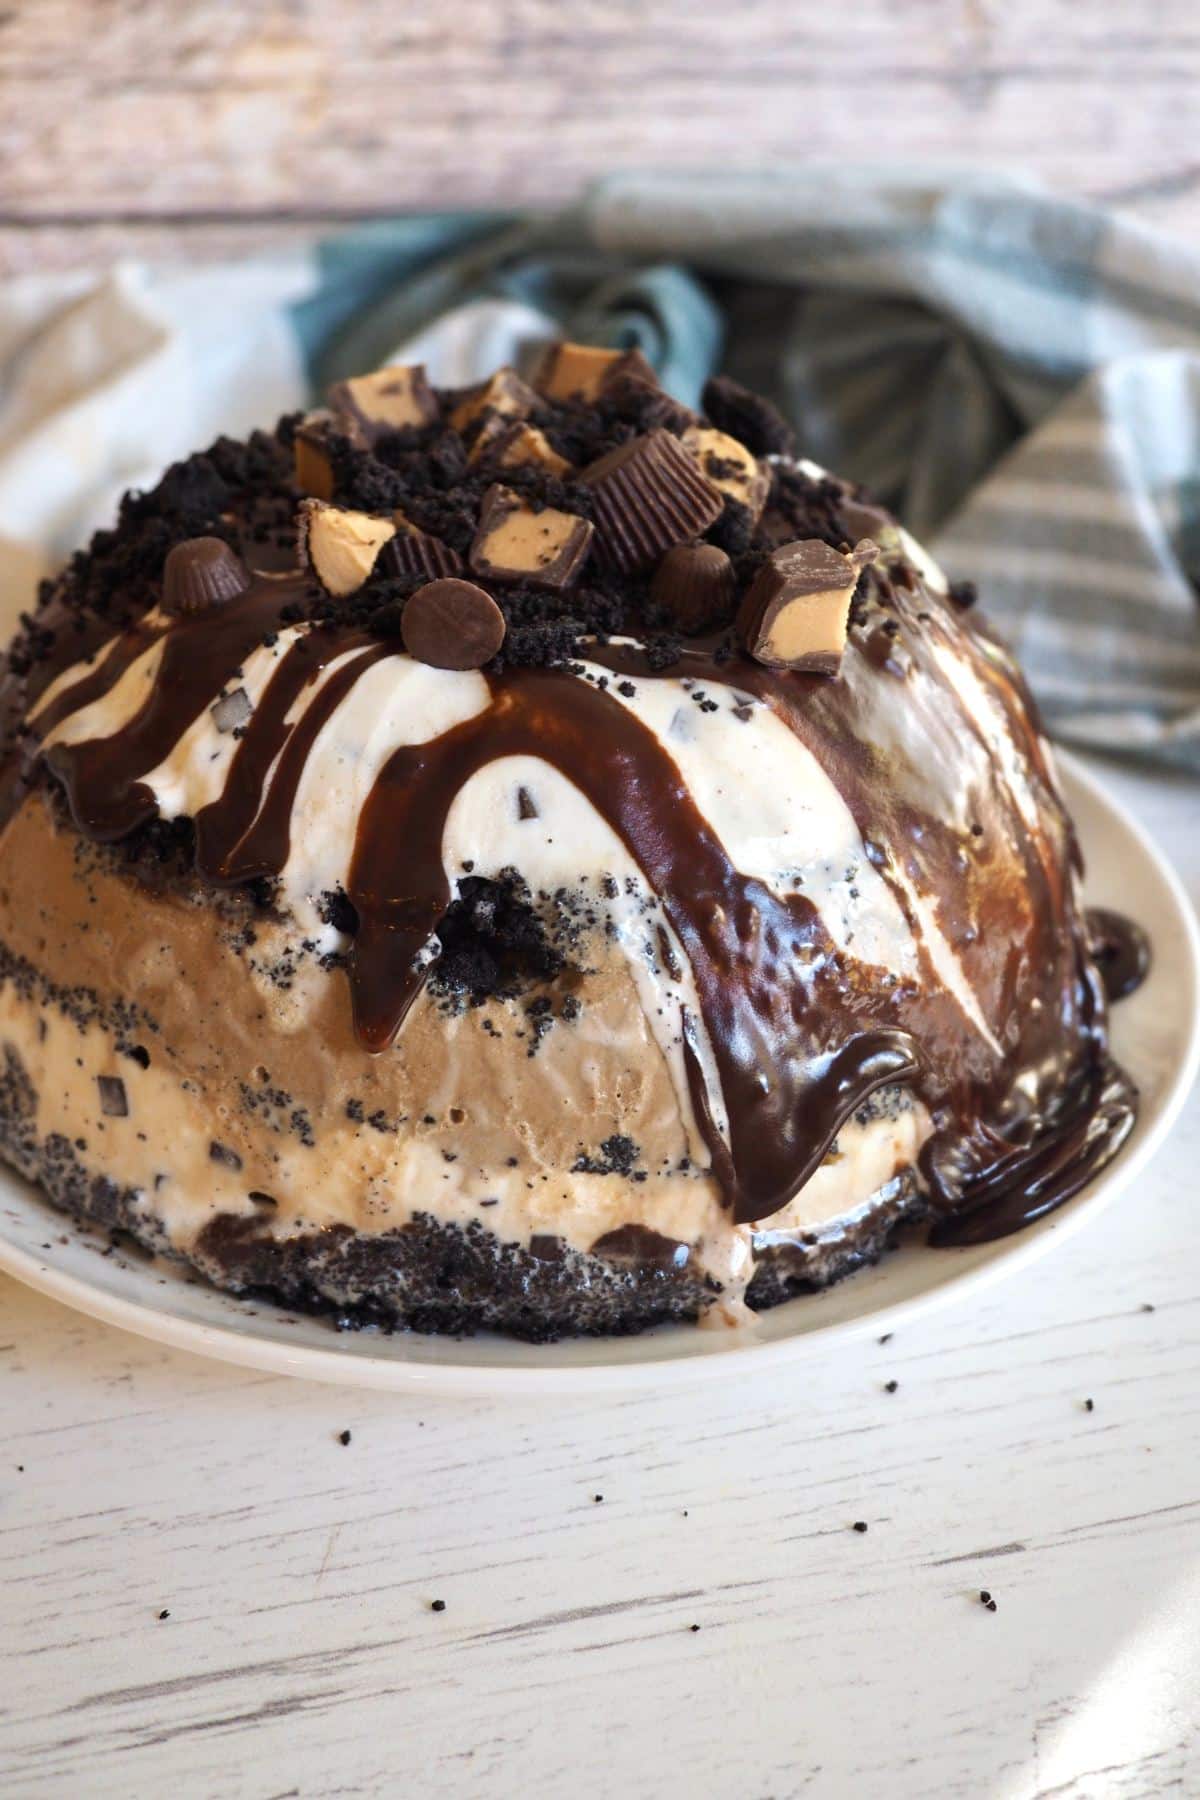 Beautiful mud pie layered ice cream cake on plate, drizzled with fudge and topped with peanut butter cups.